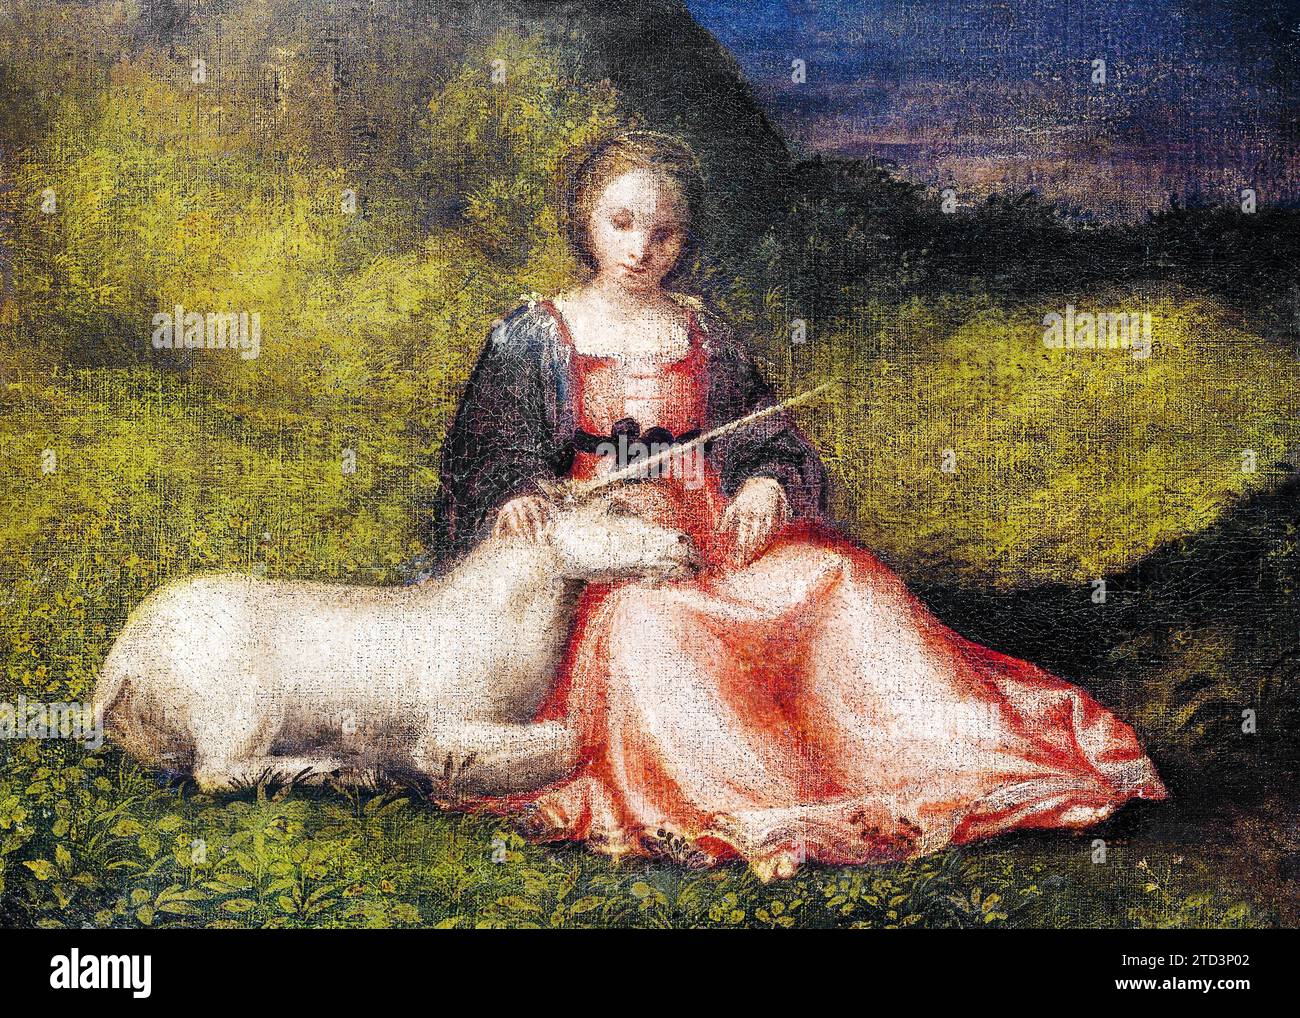 Giorgione's Woman with Unicorn  famous painting. Original from the Rijksmuseum. Stock Photo